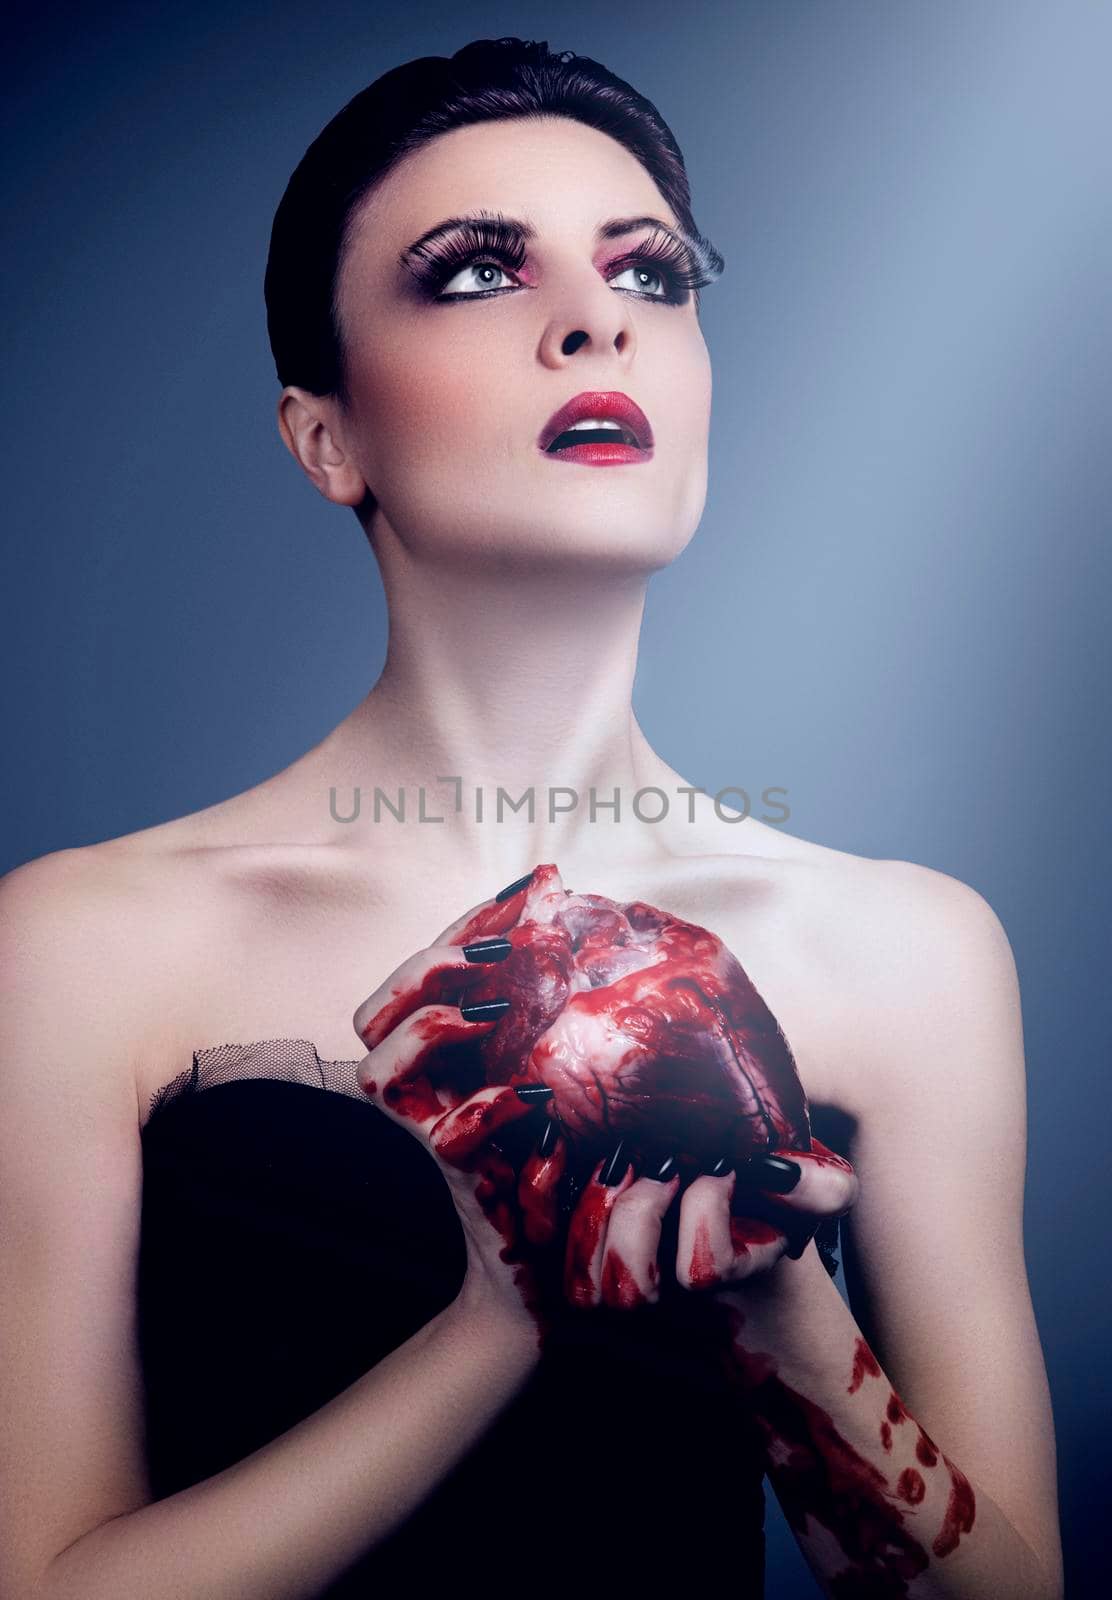 Beautiful young woman holding a bloody human heart against light blue background